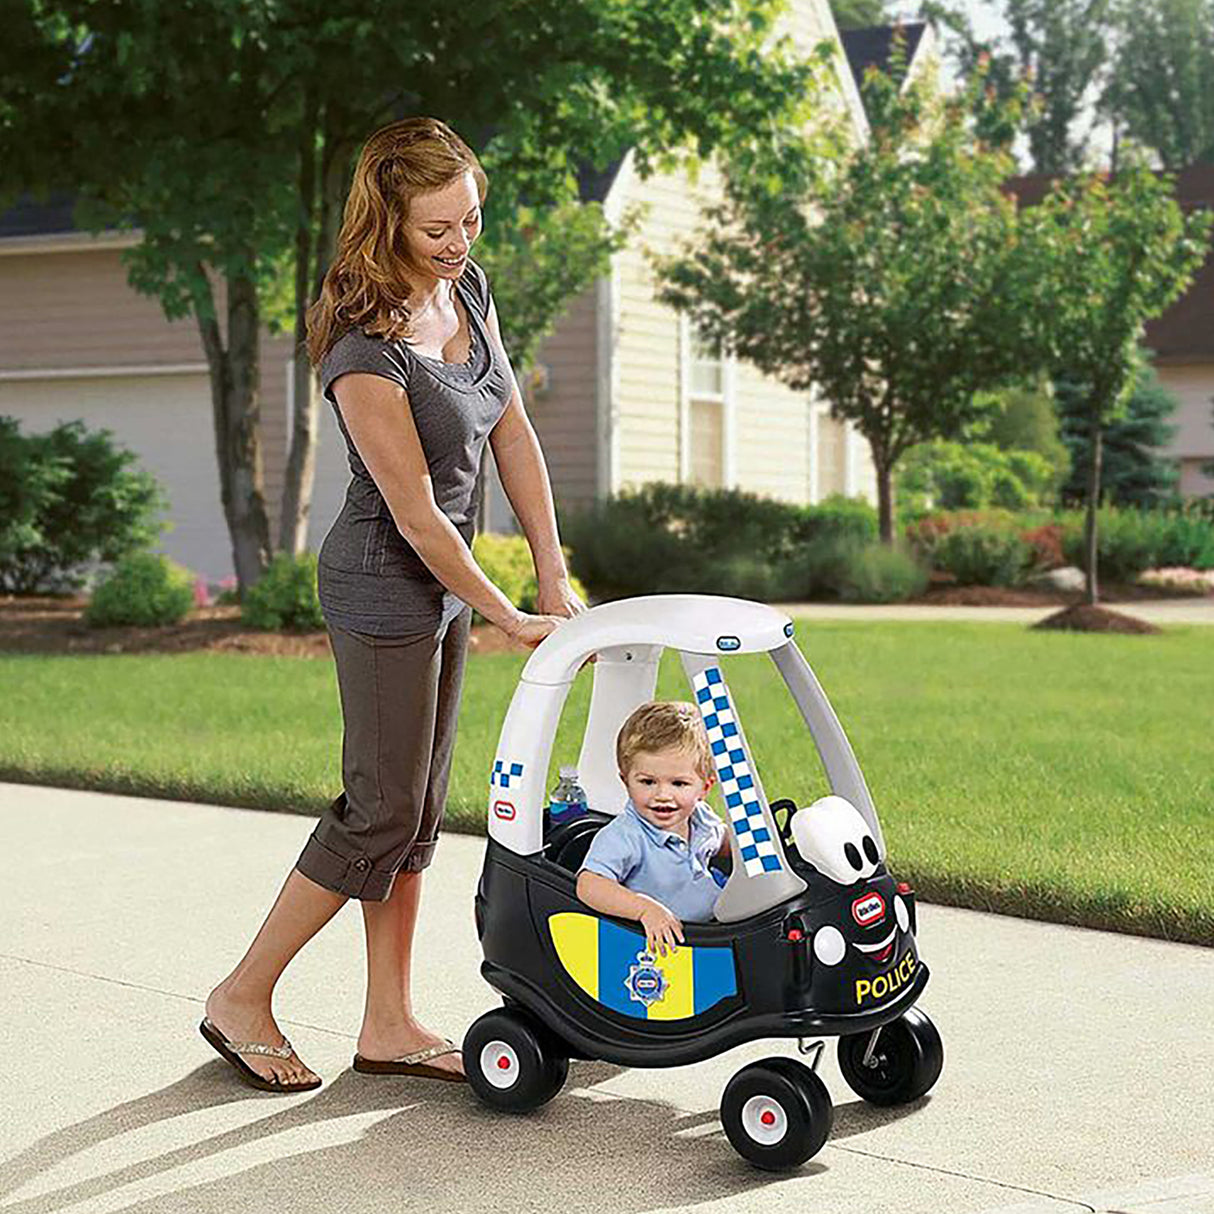 Little Tikes Cozy Coupe - Police Car